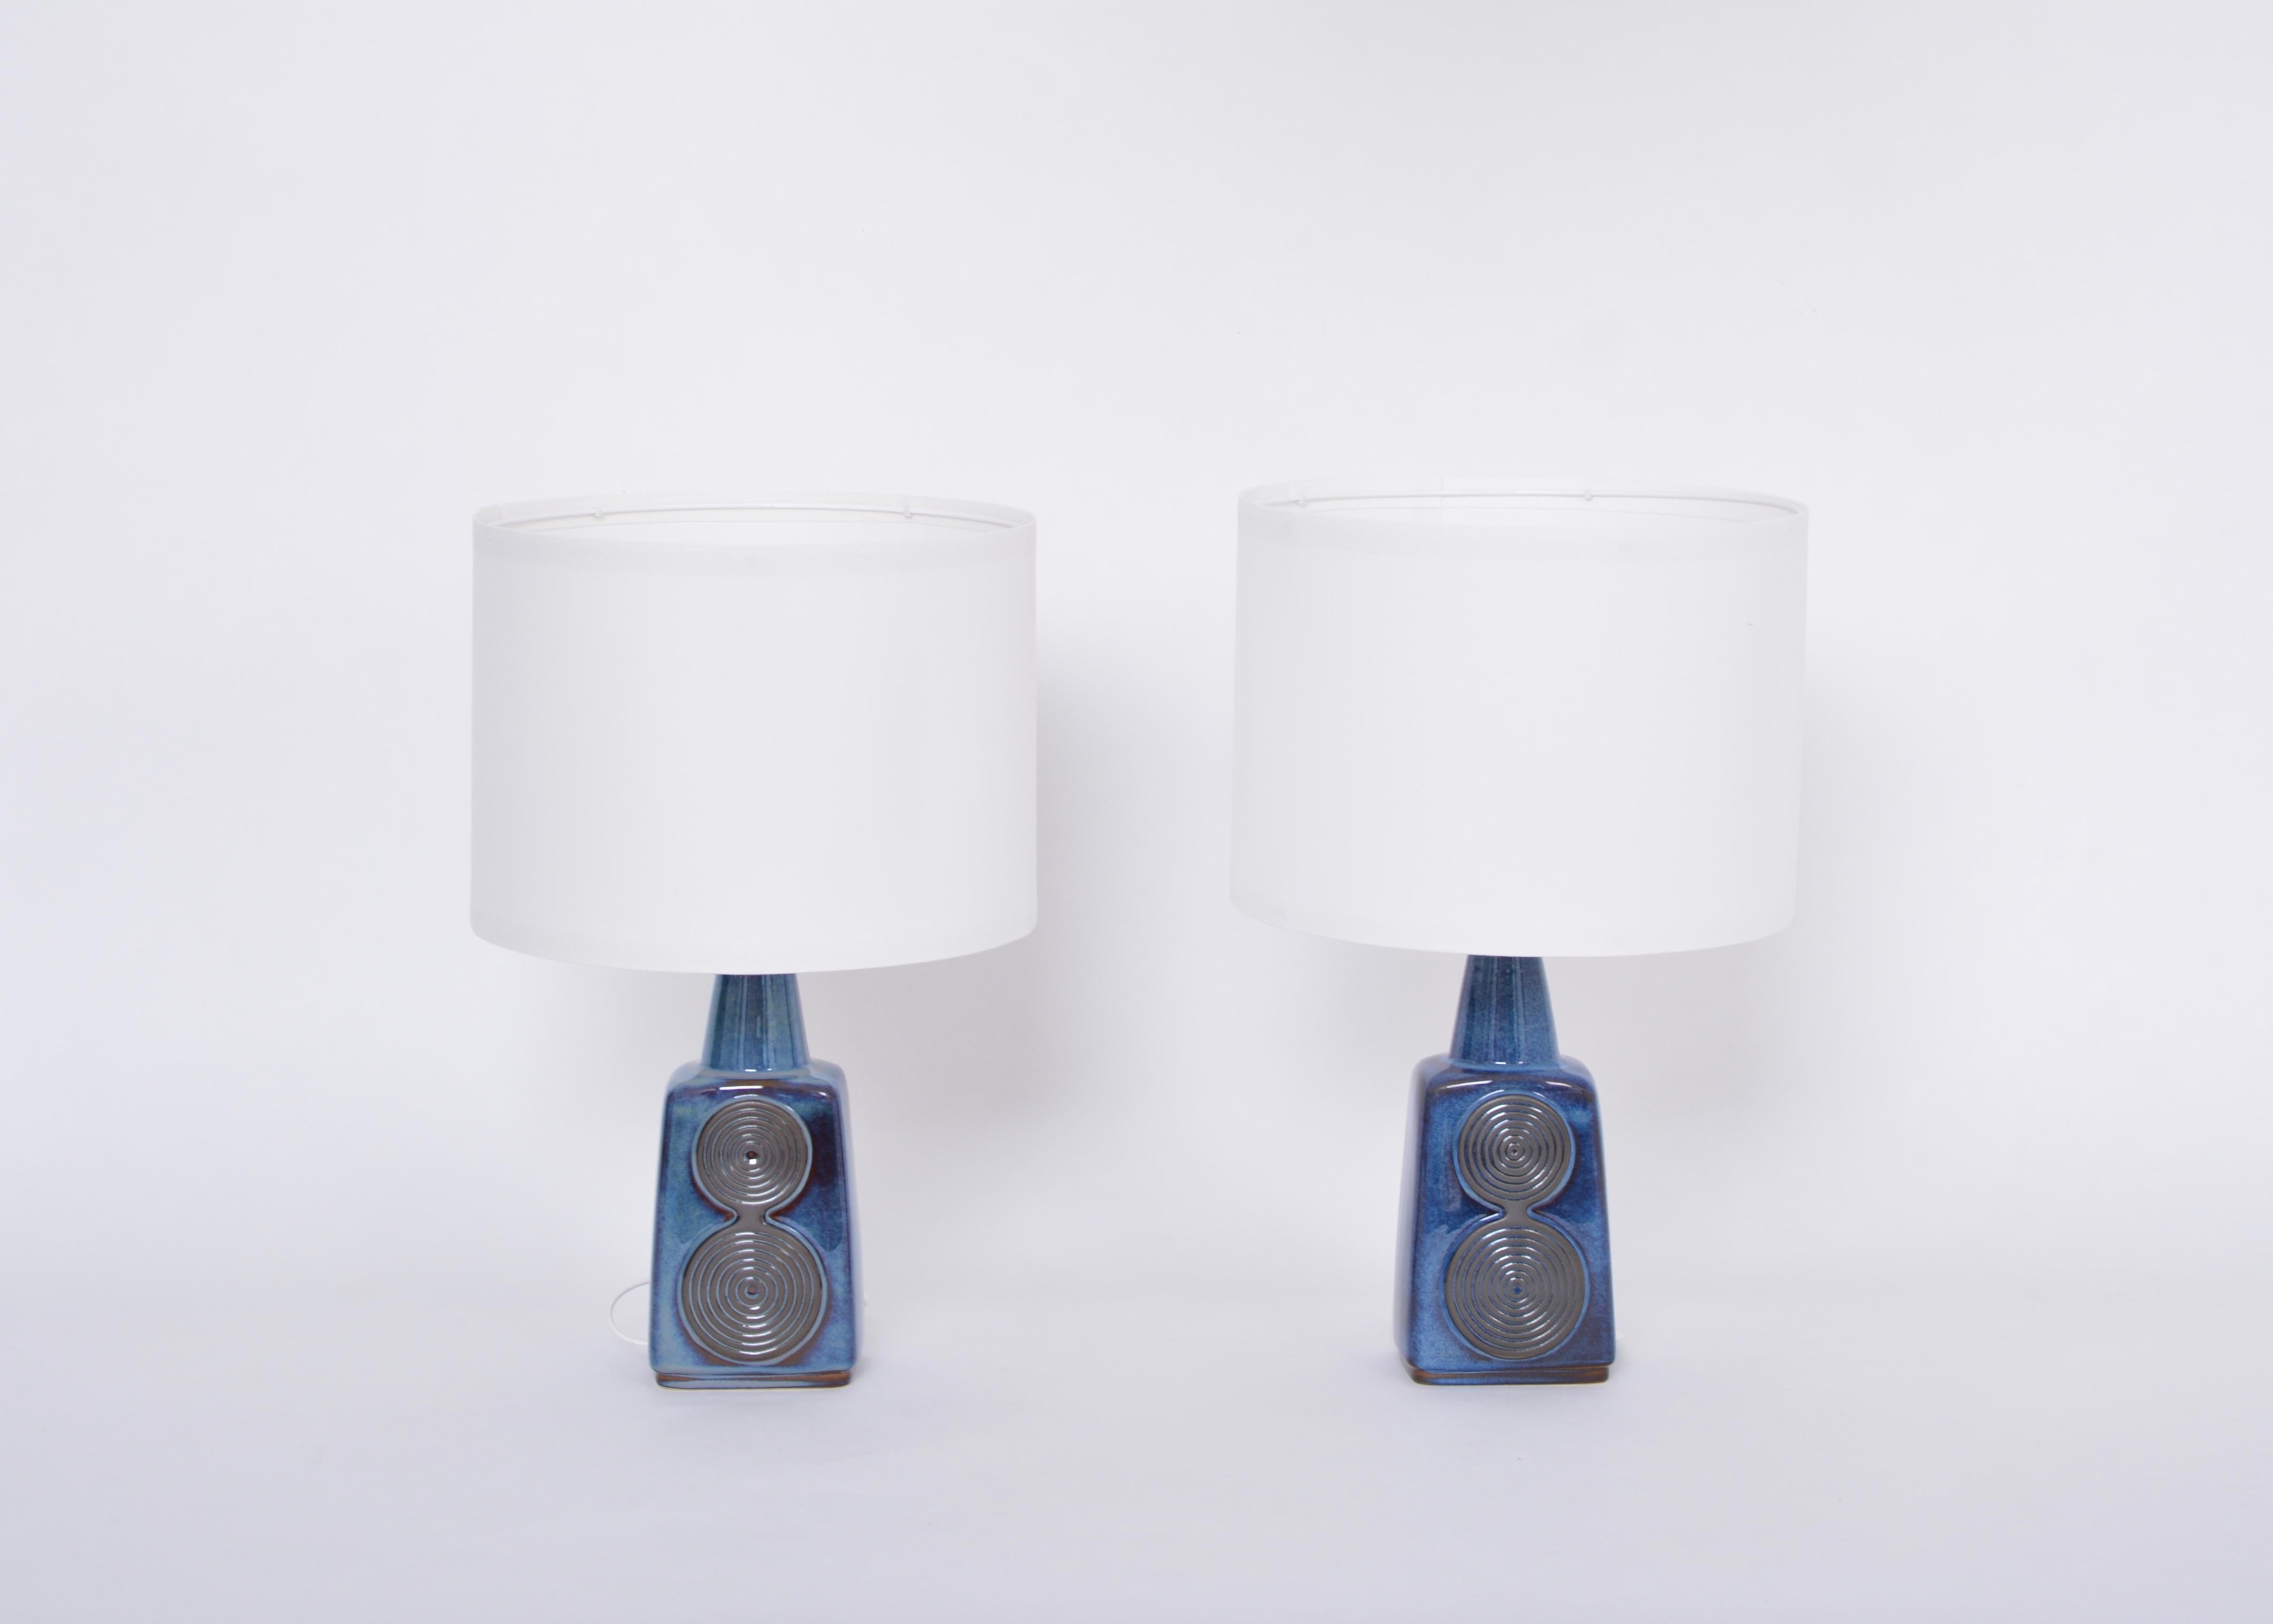 Pair of Blue midcentury Table Lamps Model 1097 by Einar Johansen for Soholm

Pair of ceramic table lamps designed by Einar Johansen and produced by Danish company Soholm Stentoj probably in the 1960s. The lamp's base are made of stoneware and are